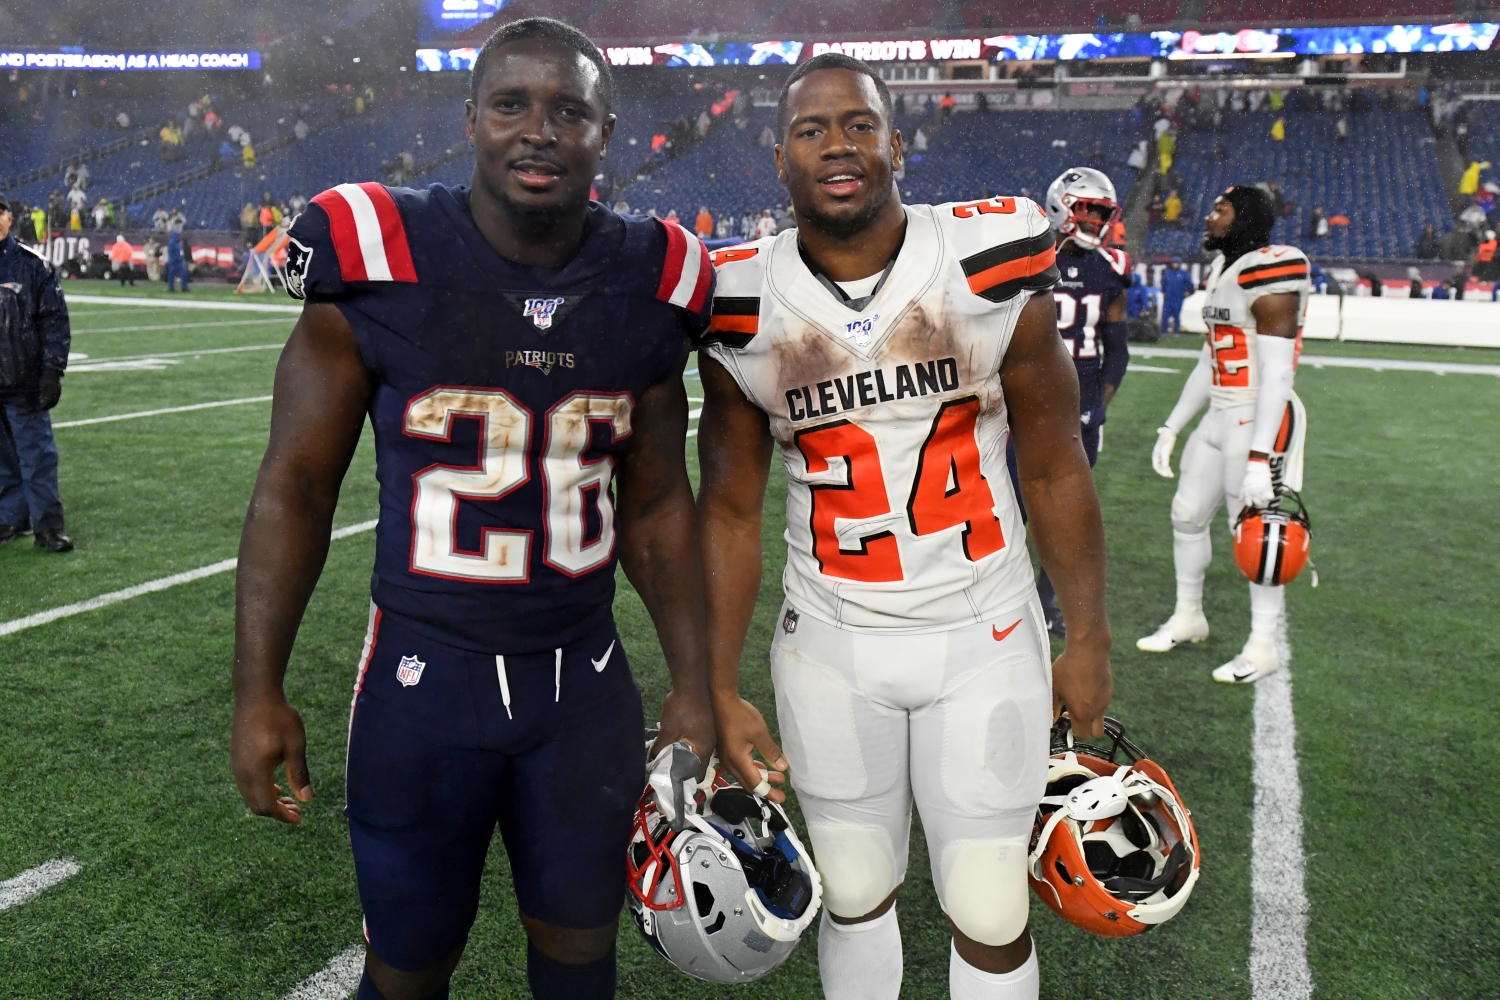 New England Patriots running back Sony Michel stands next to Cleveland Browns star and college teammate Nick Chubb after a game.